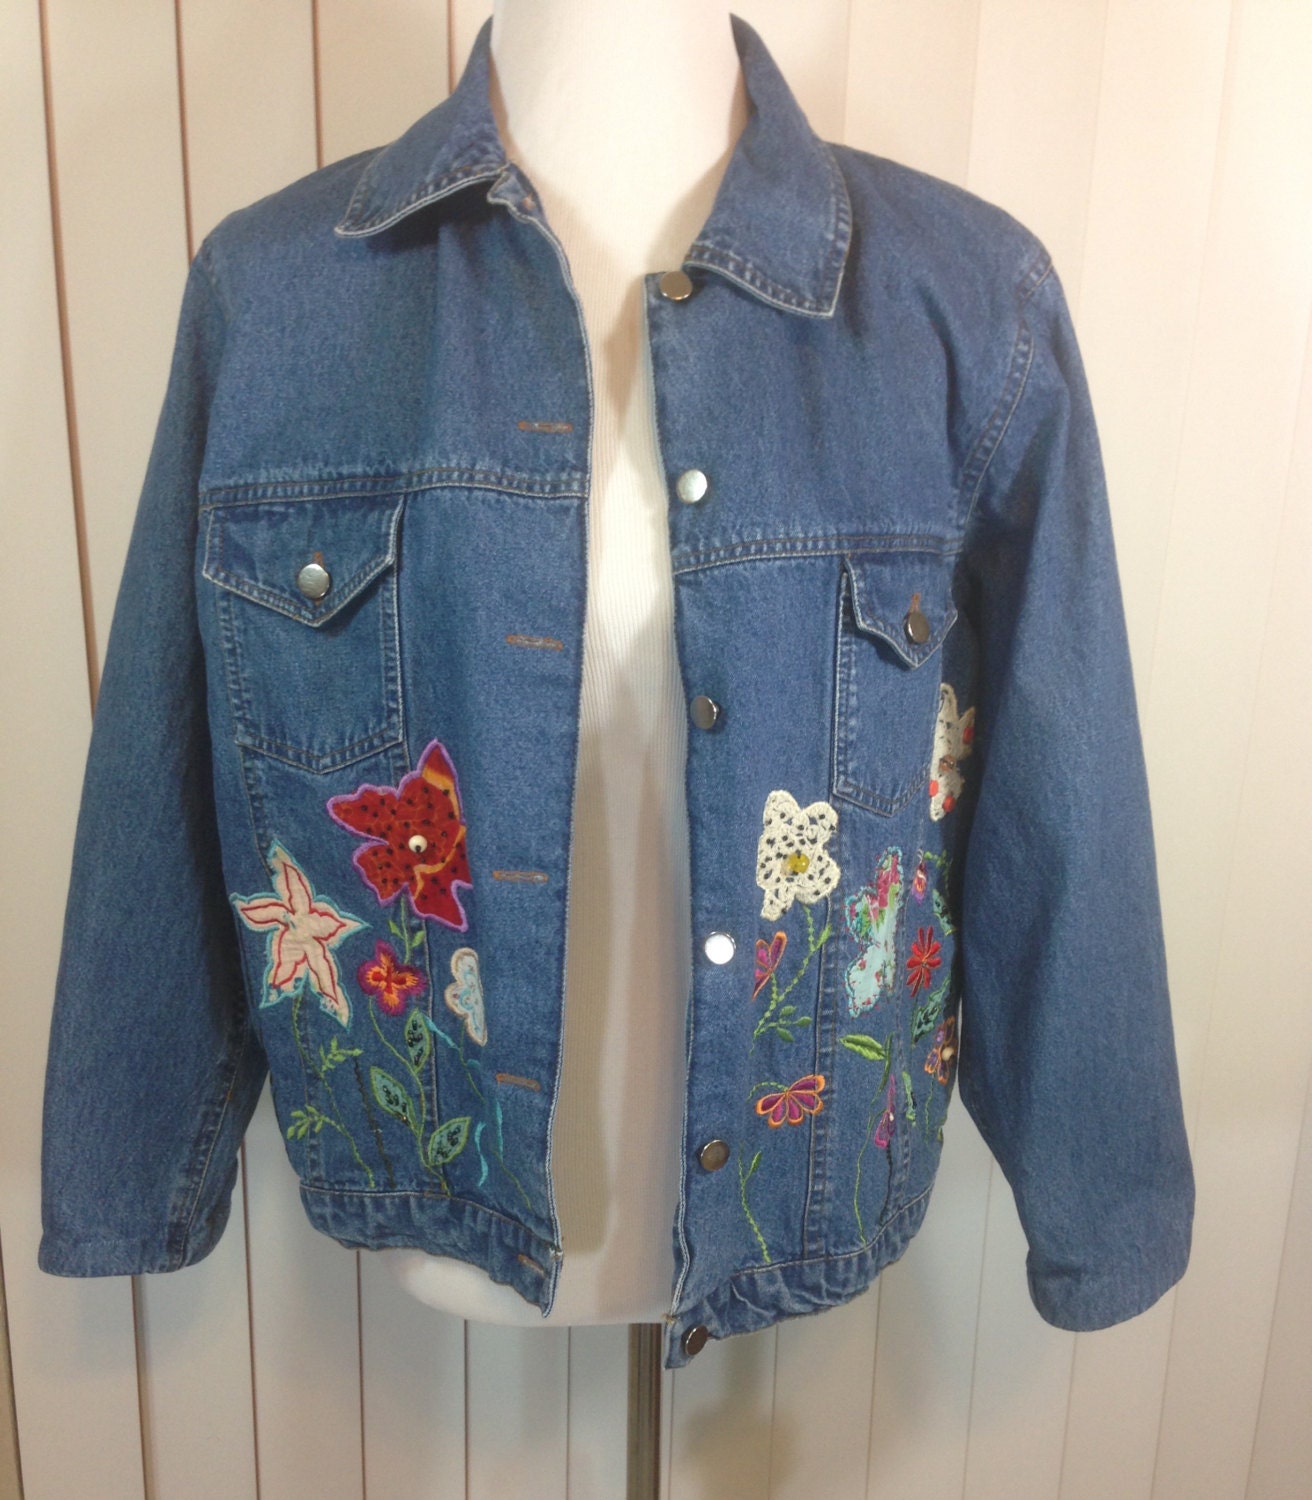 Vintage Jean Jacket with Embroidered Flowers, Crochet and Cotton ...